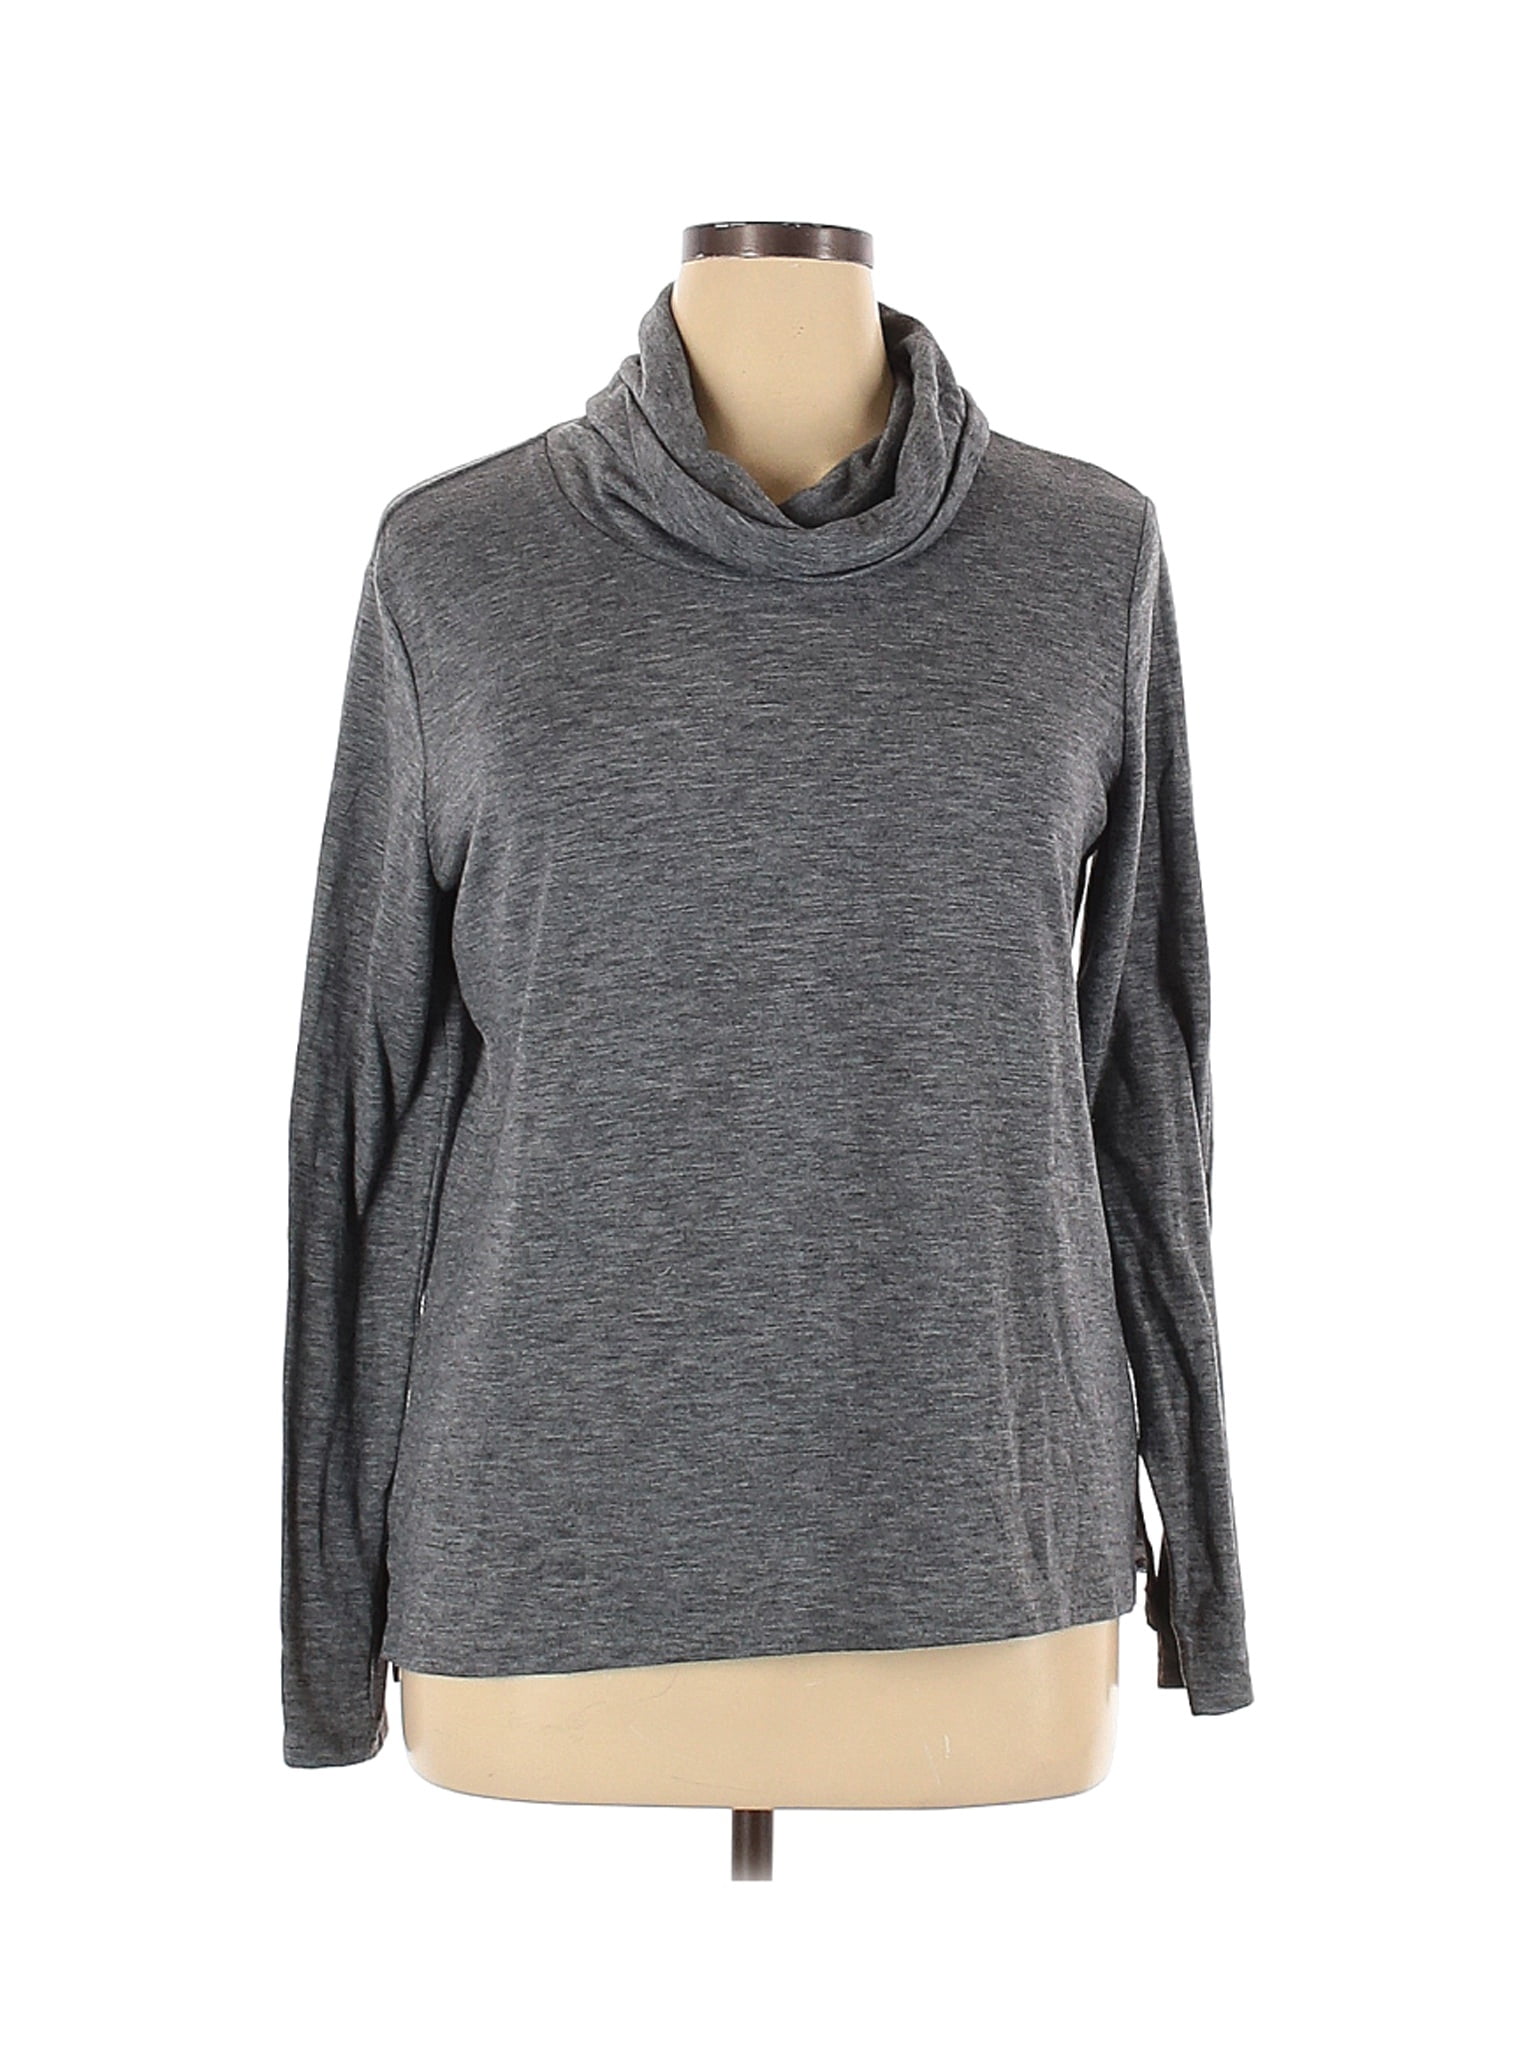 Old Navy - Pre-Owned Old Navy Women's Size XL Tall Turtleneck Sweater ...